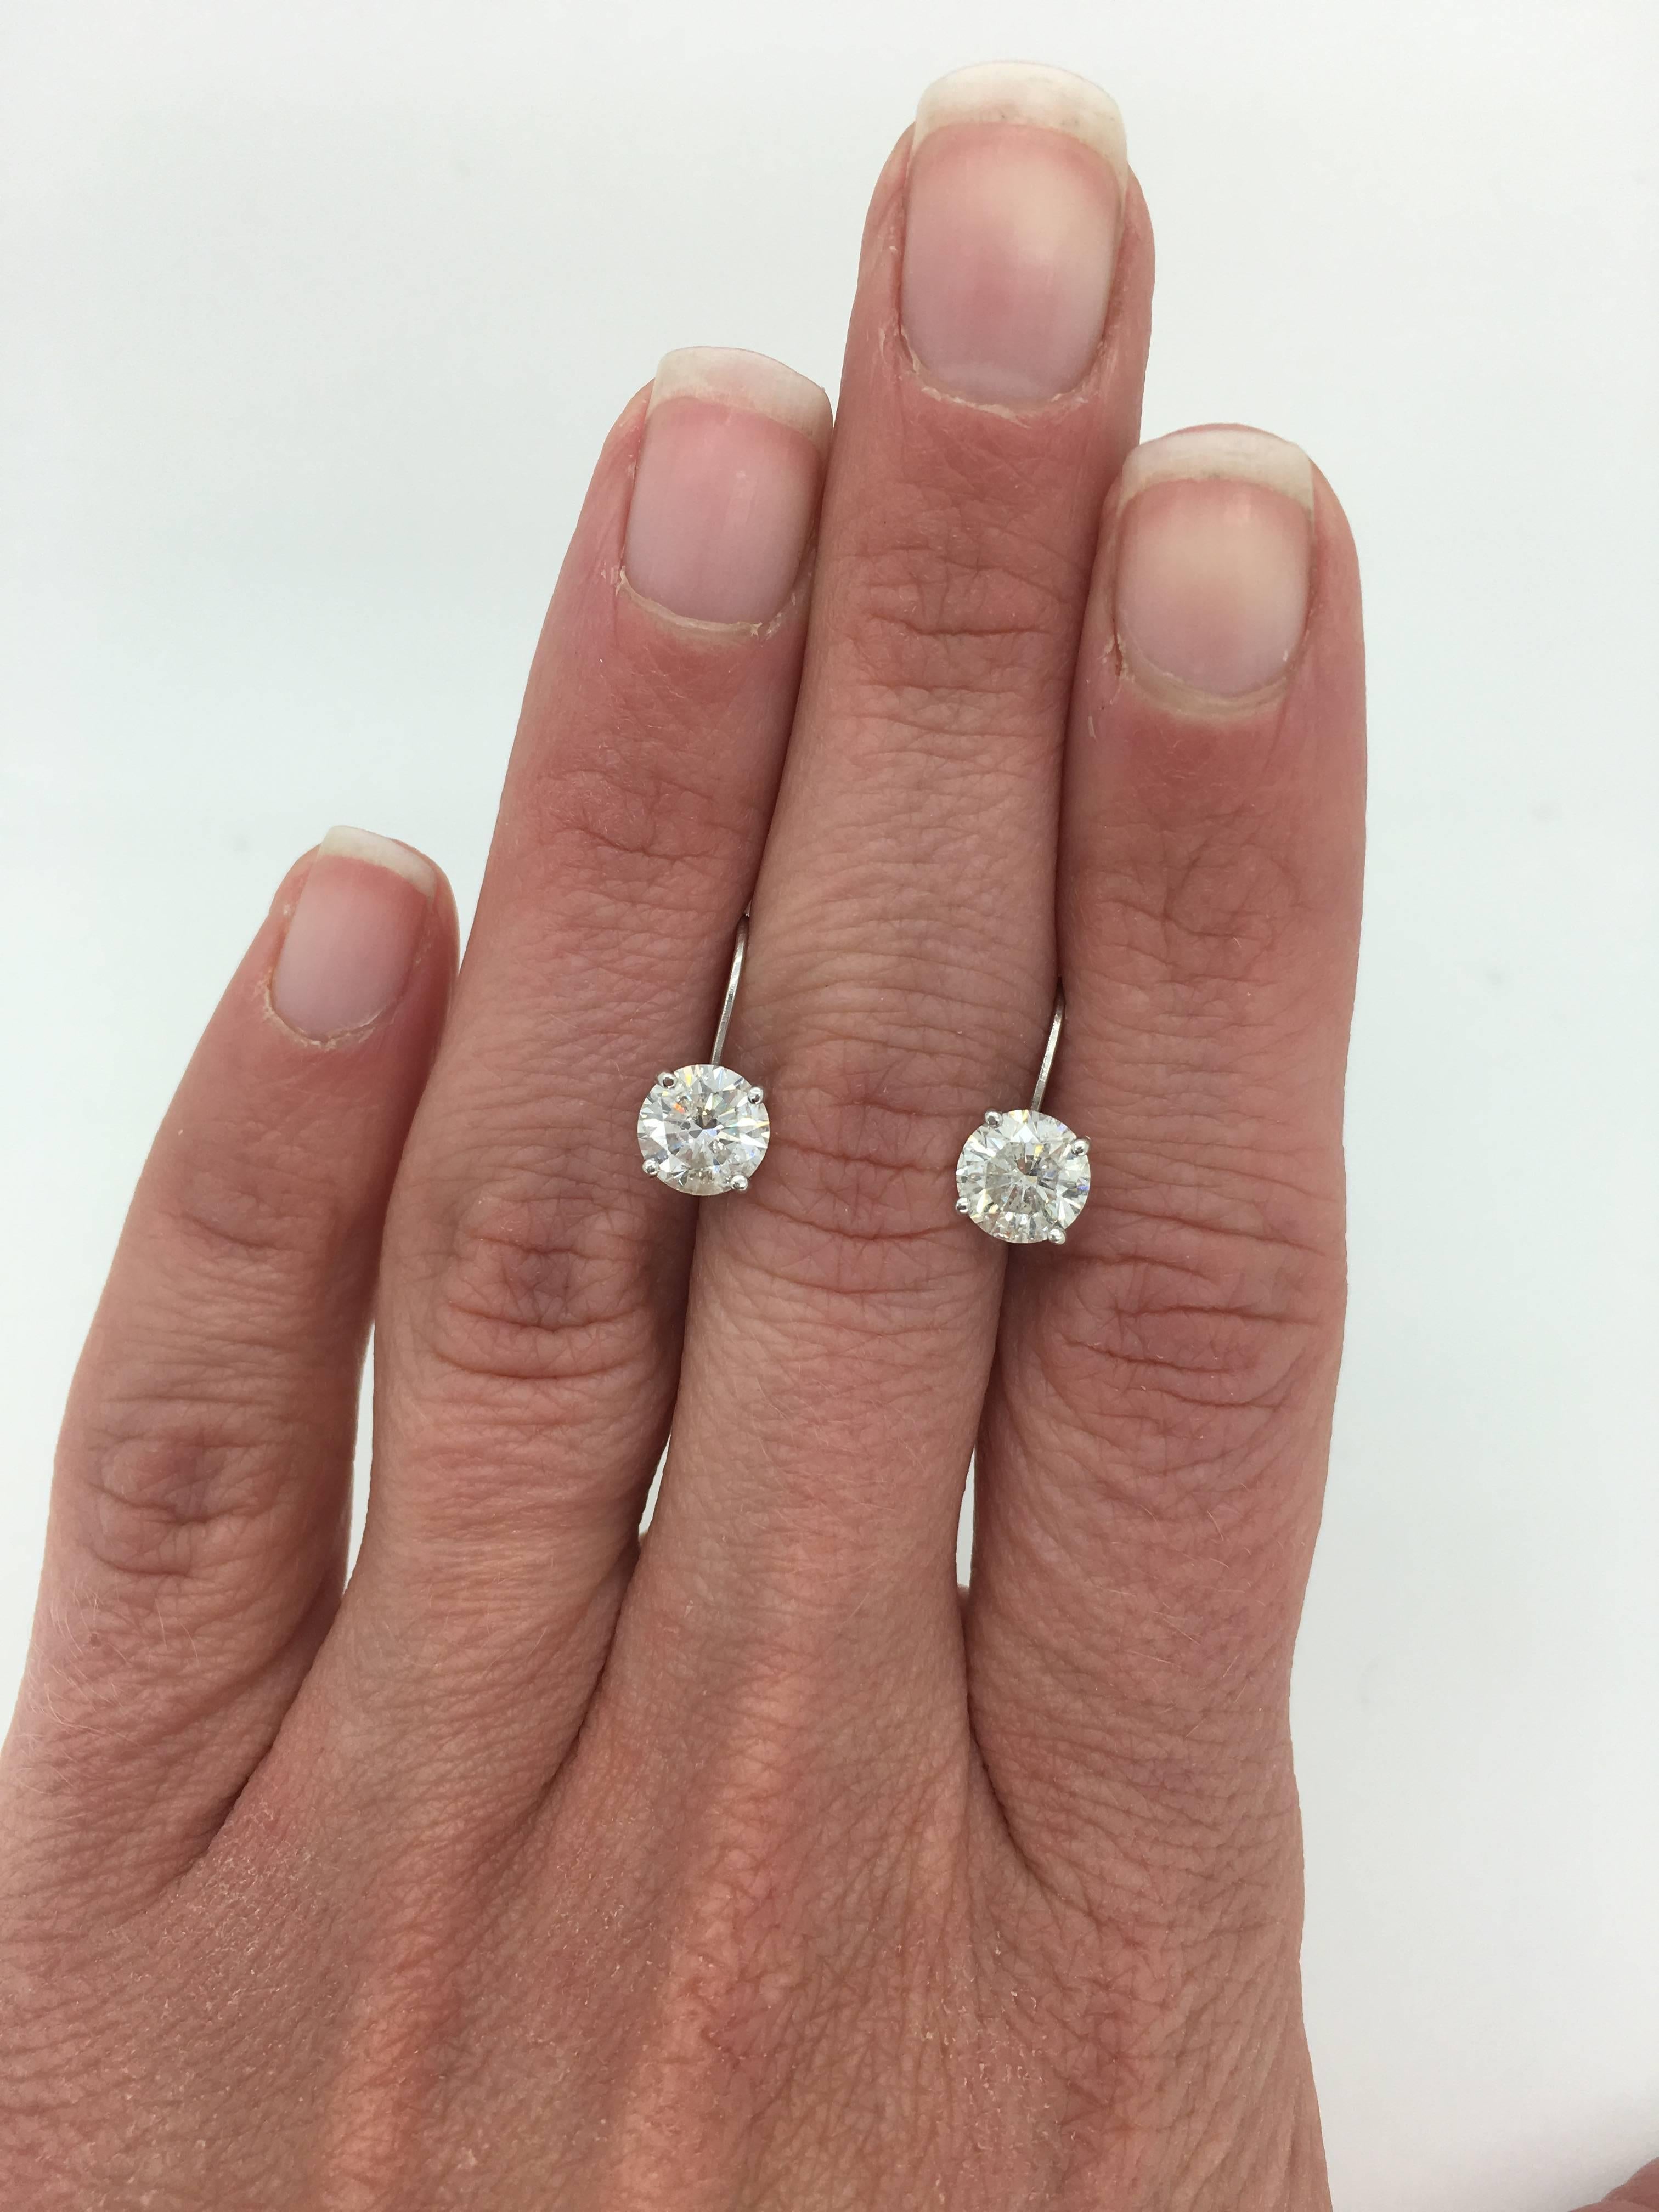 2.06ct Round Brilliant cut diamonds mounted into 14k white gold lever back earrings. 

One Round Brilliant cut diamond weighing approximately .98ct
One Round Brilliant cut diamond weighting approximately 1.08ct 
Total diamond weight of 2.06ctw